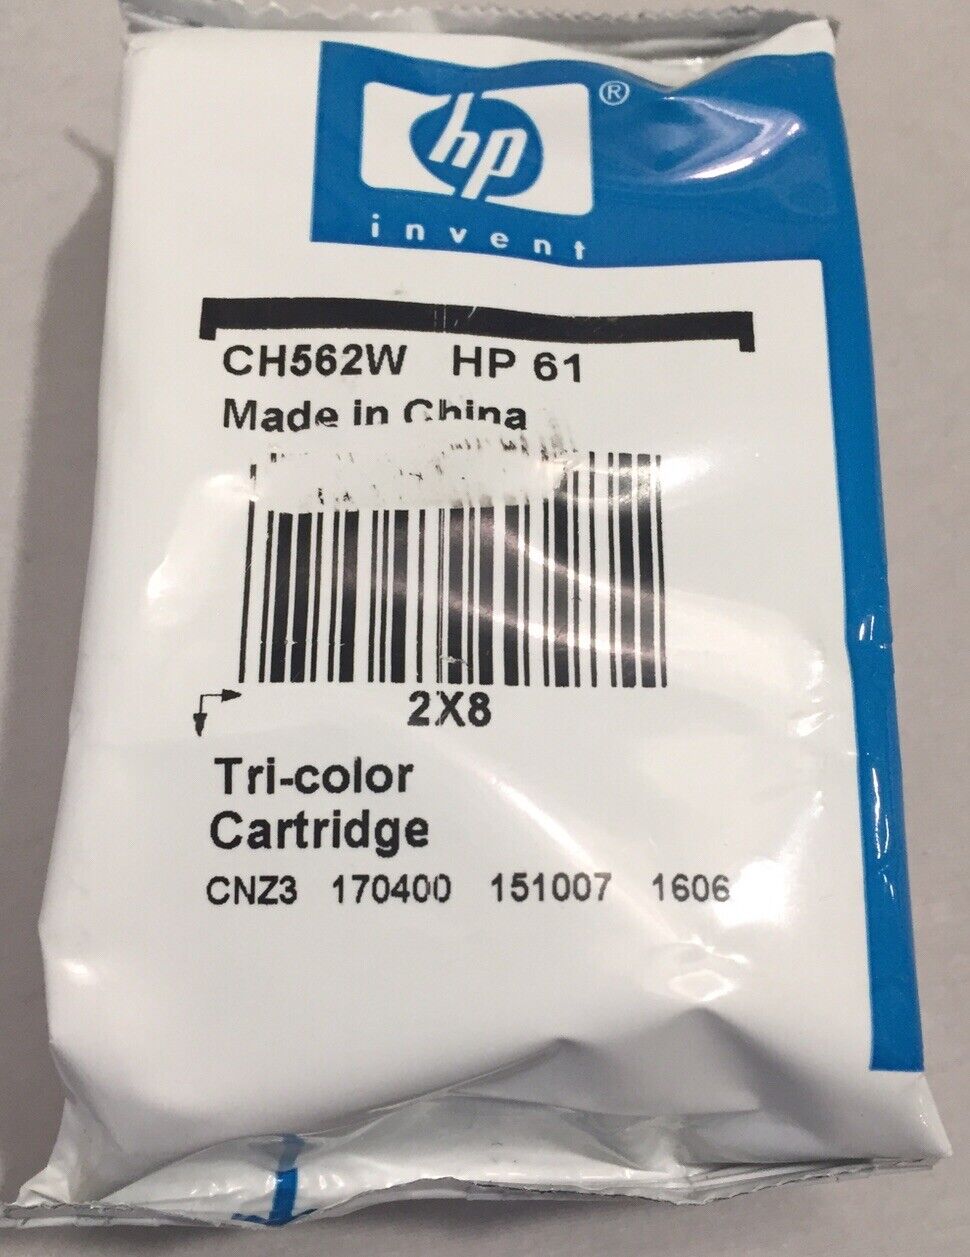 HP Invent Tri-color Cartridge CH562W HP 61 New in Package